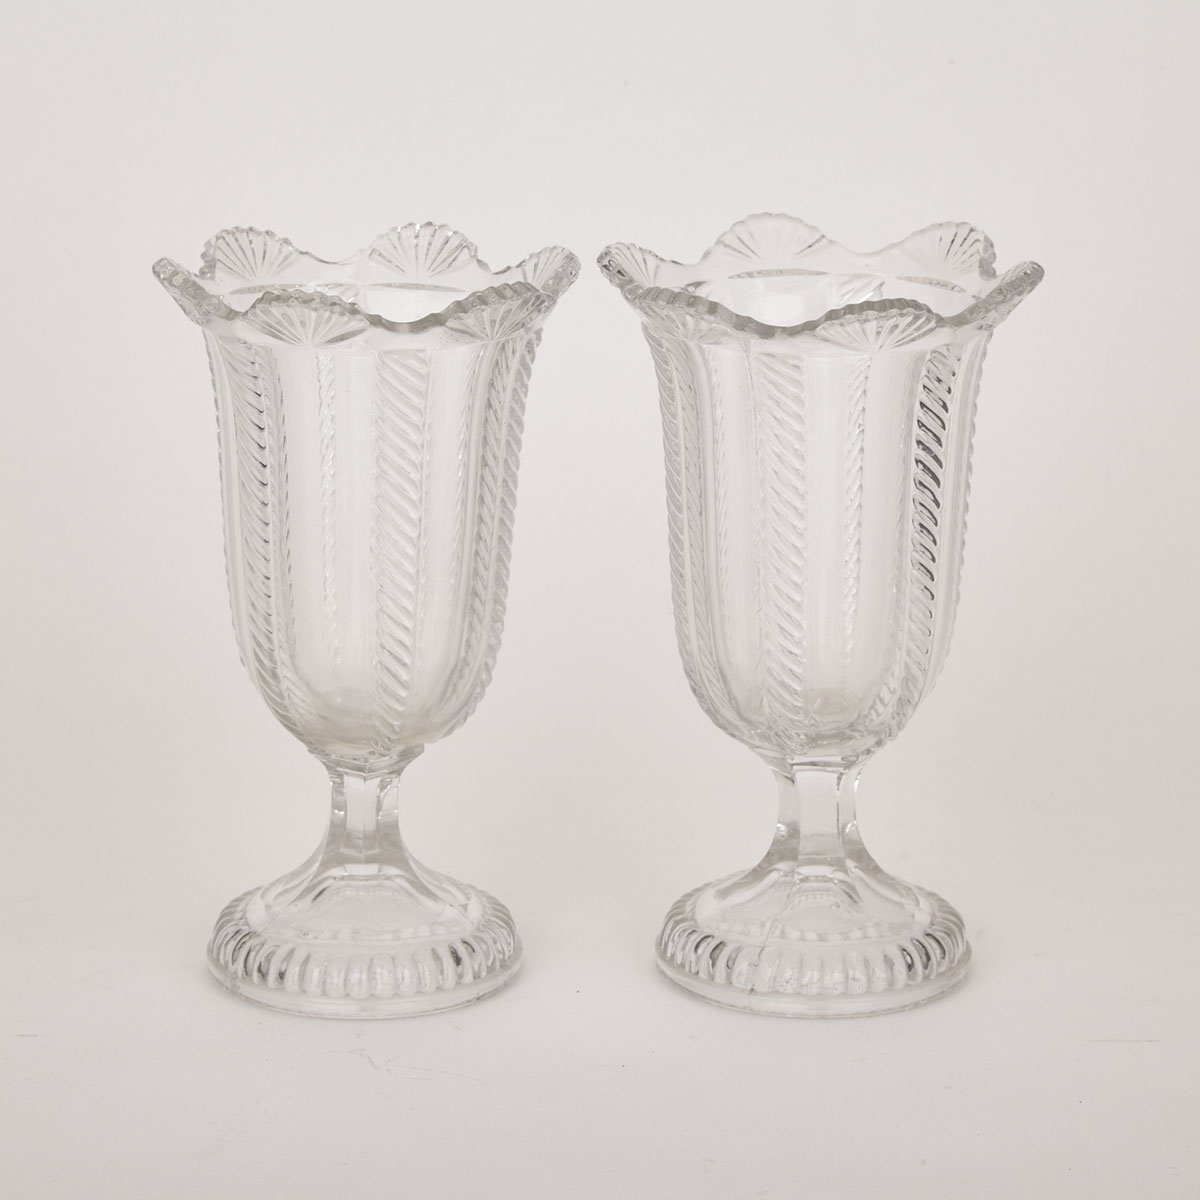 Pair of Boston & Sandwich Glass Co. Cable Pattern Celery Vases, mid 19th century